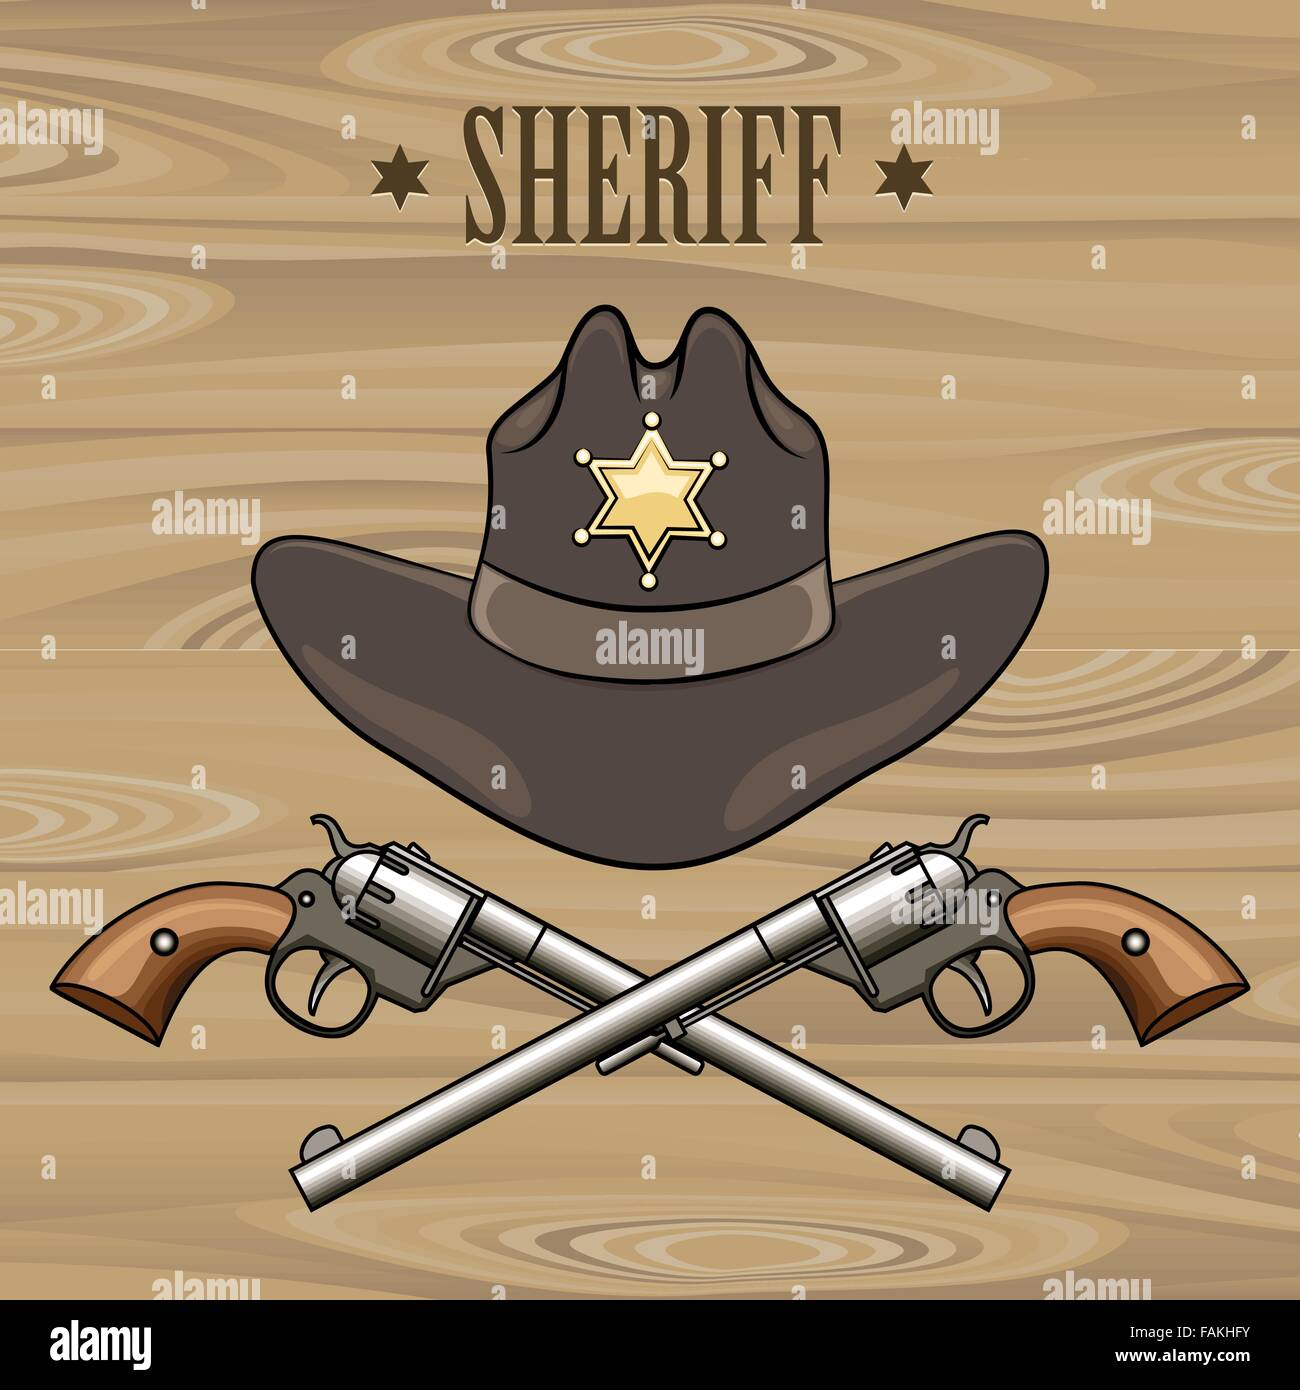 Sheriff hat and crossed revolvers. Illustration in cartoon style. Stock Vector